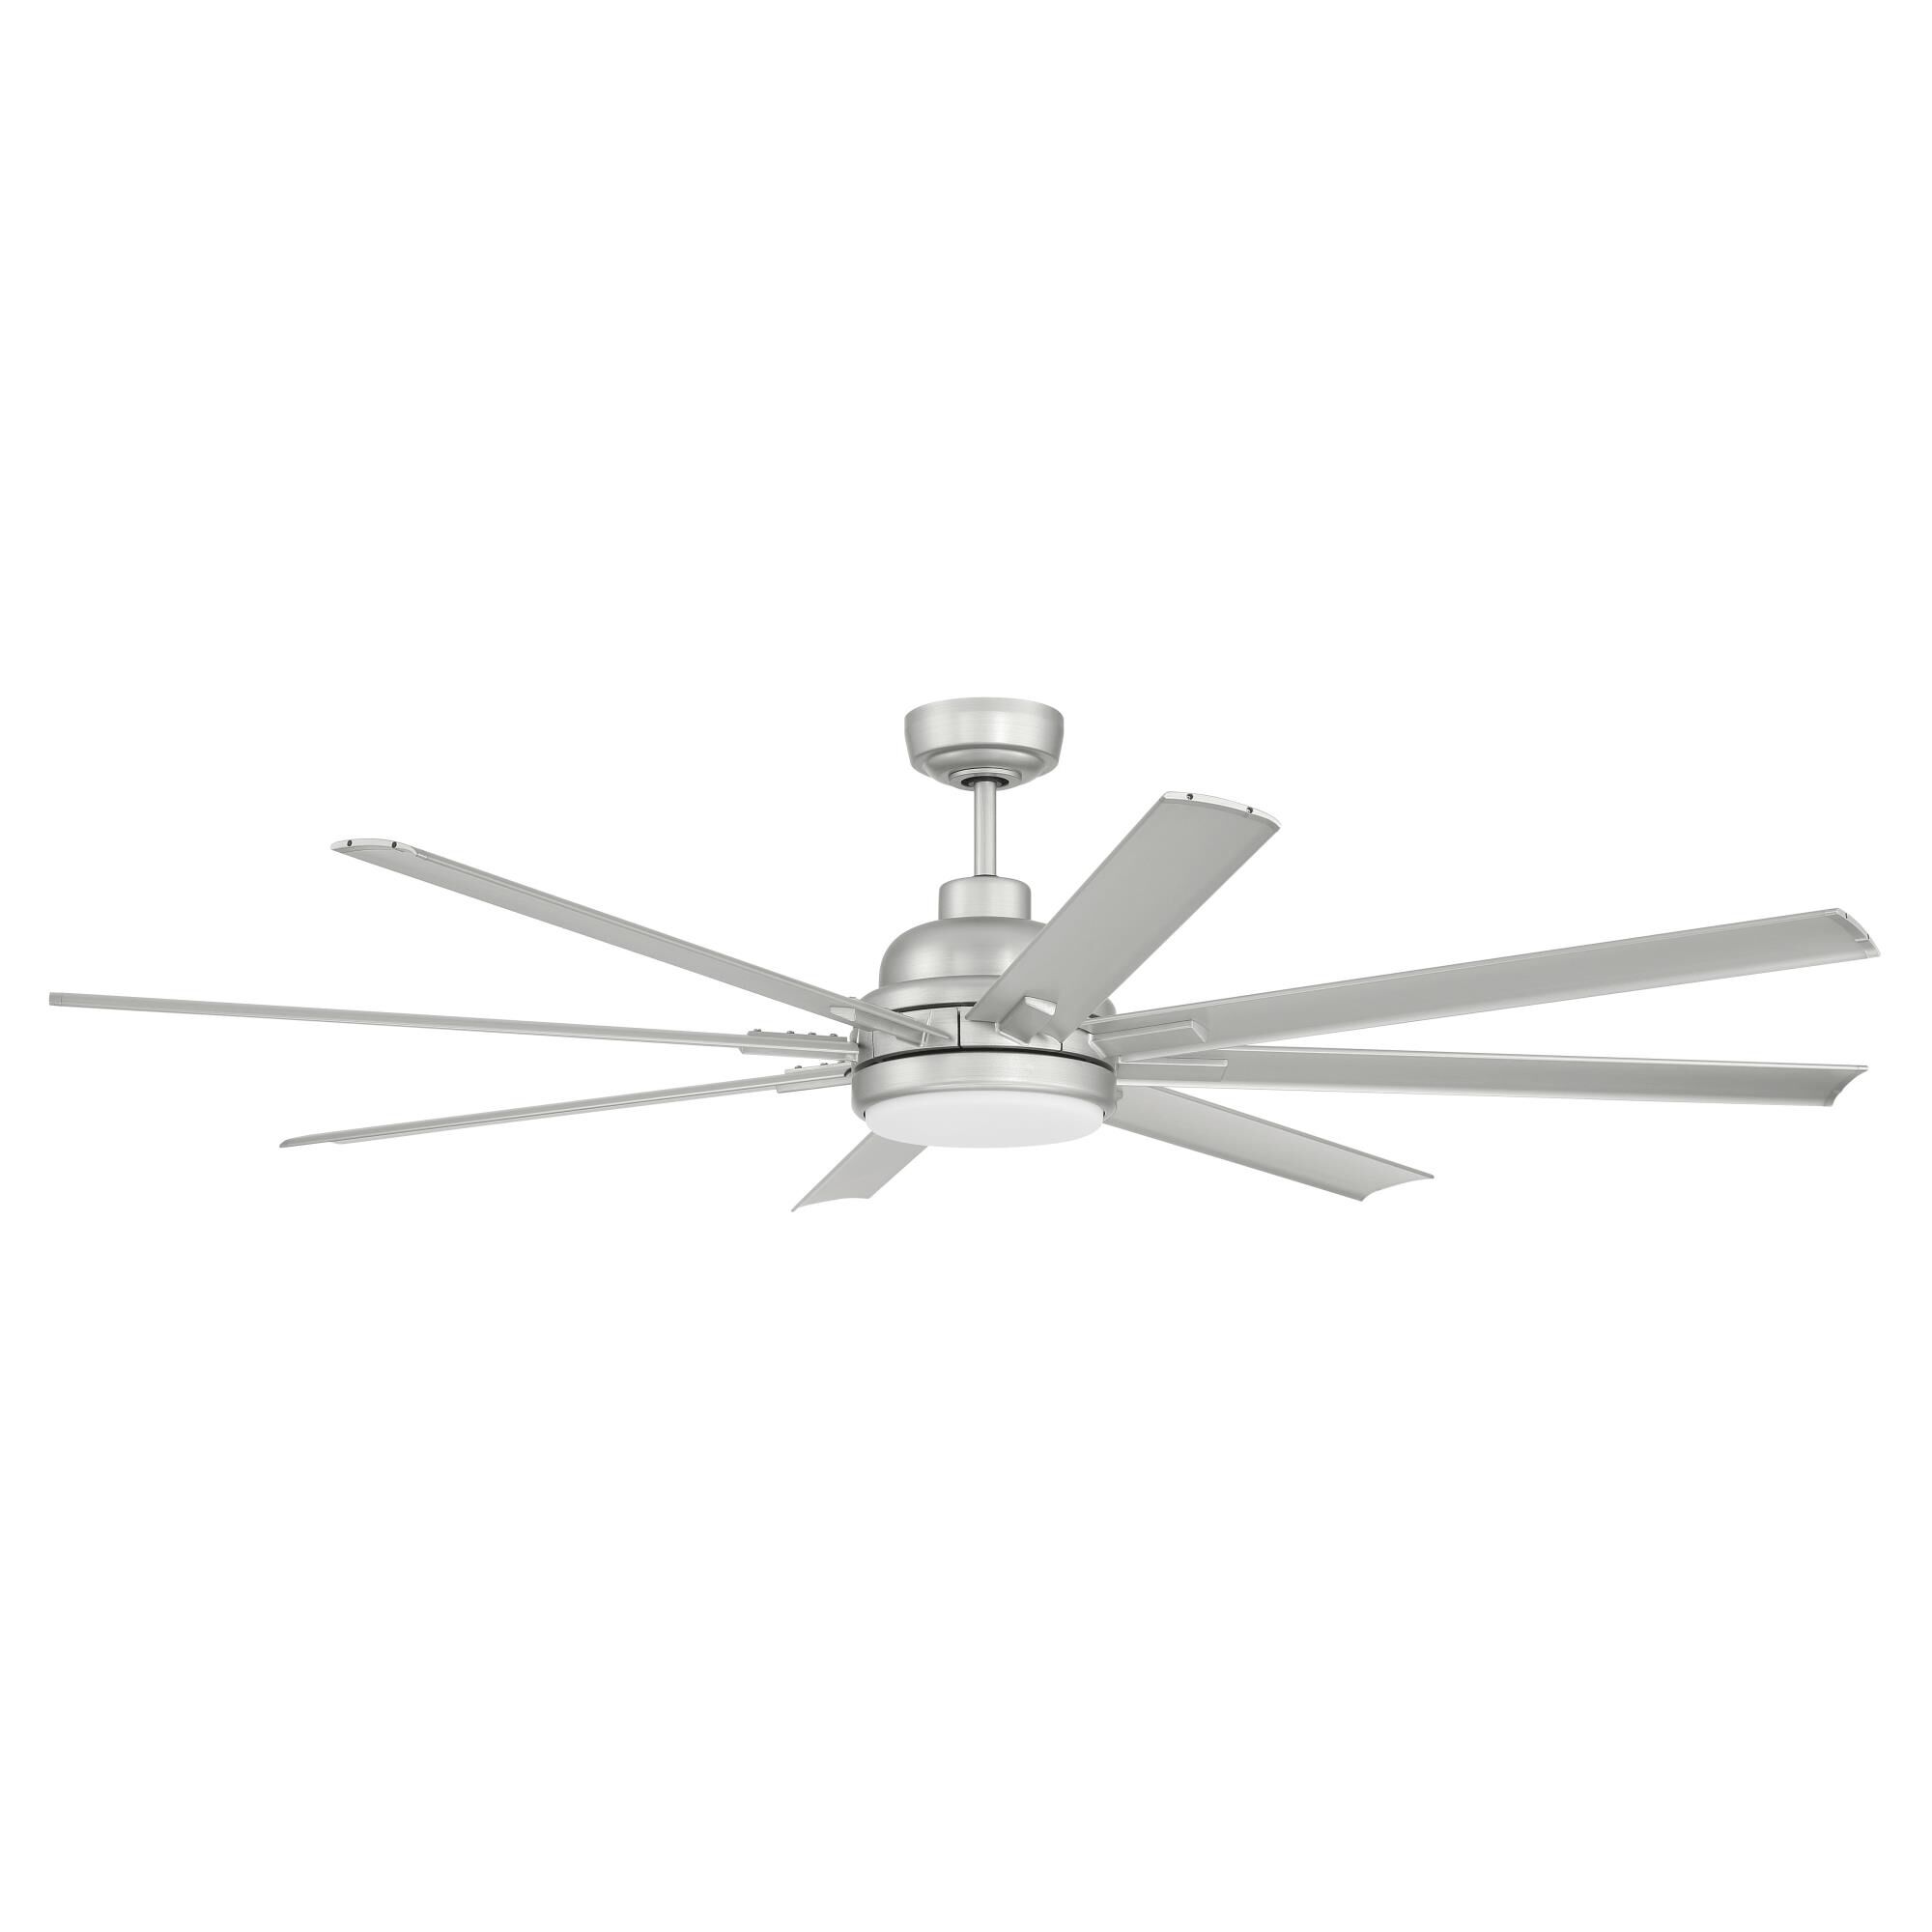 Photos - Fan Craftmade Rush Outdoor Rated 65 Inch Ceiling  Rush - RSH65PN8 - Modern